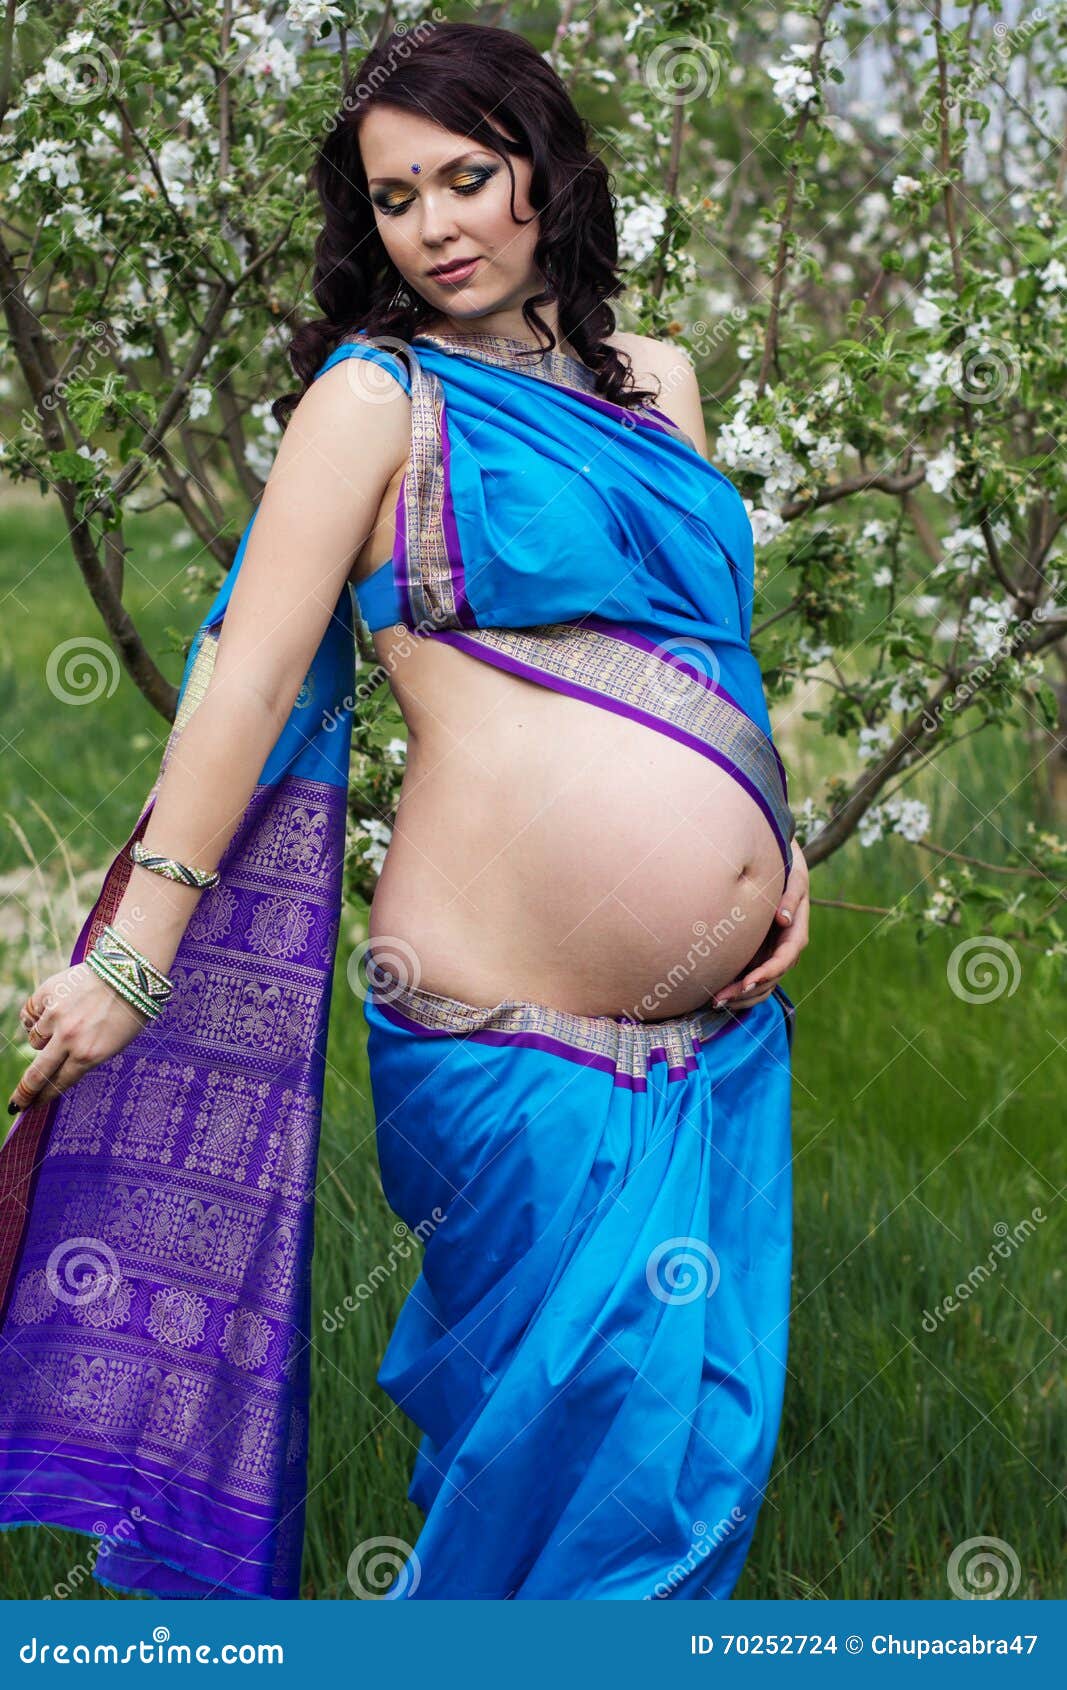 Pregnant Woman is Wearing Blue Sari Outdoors Stock Photo - Image